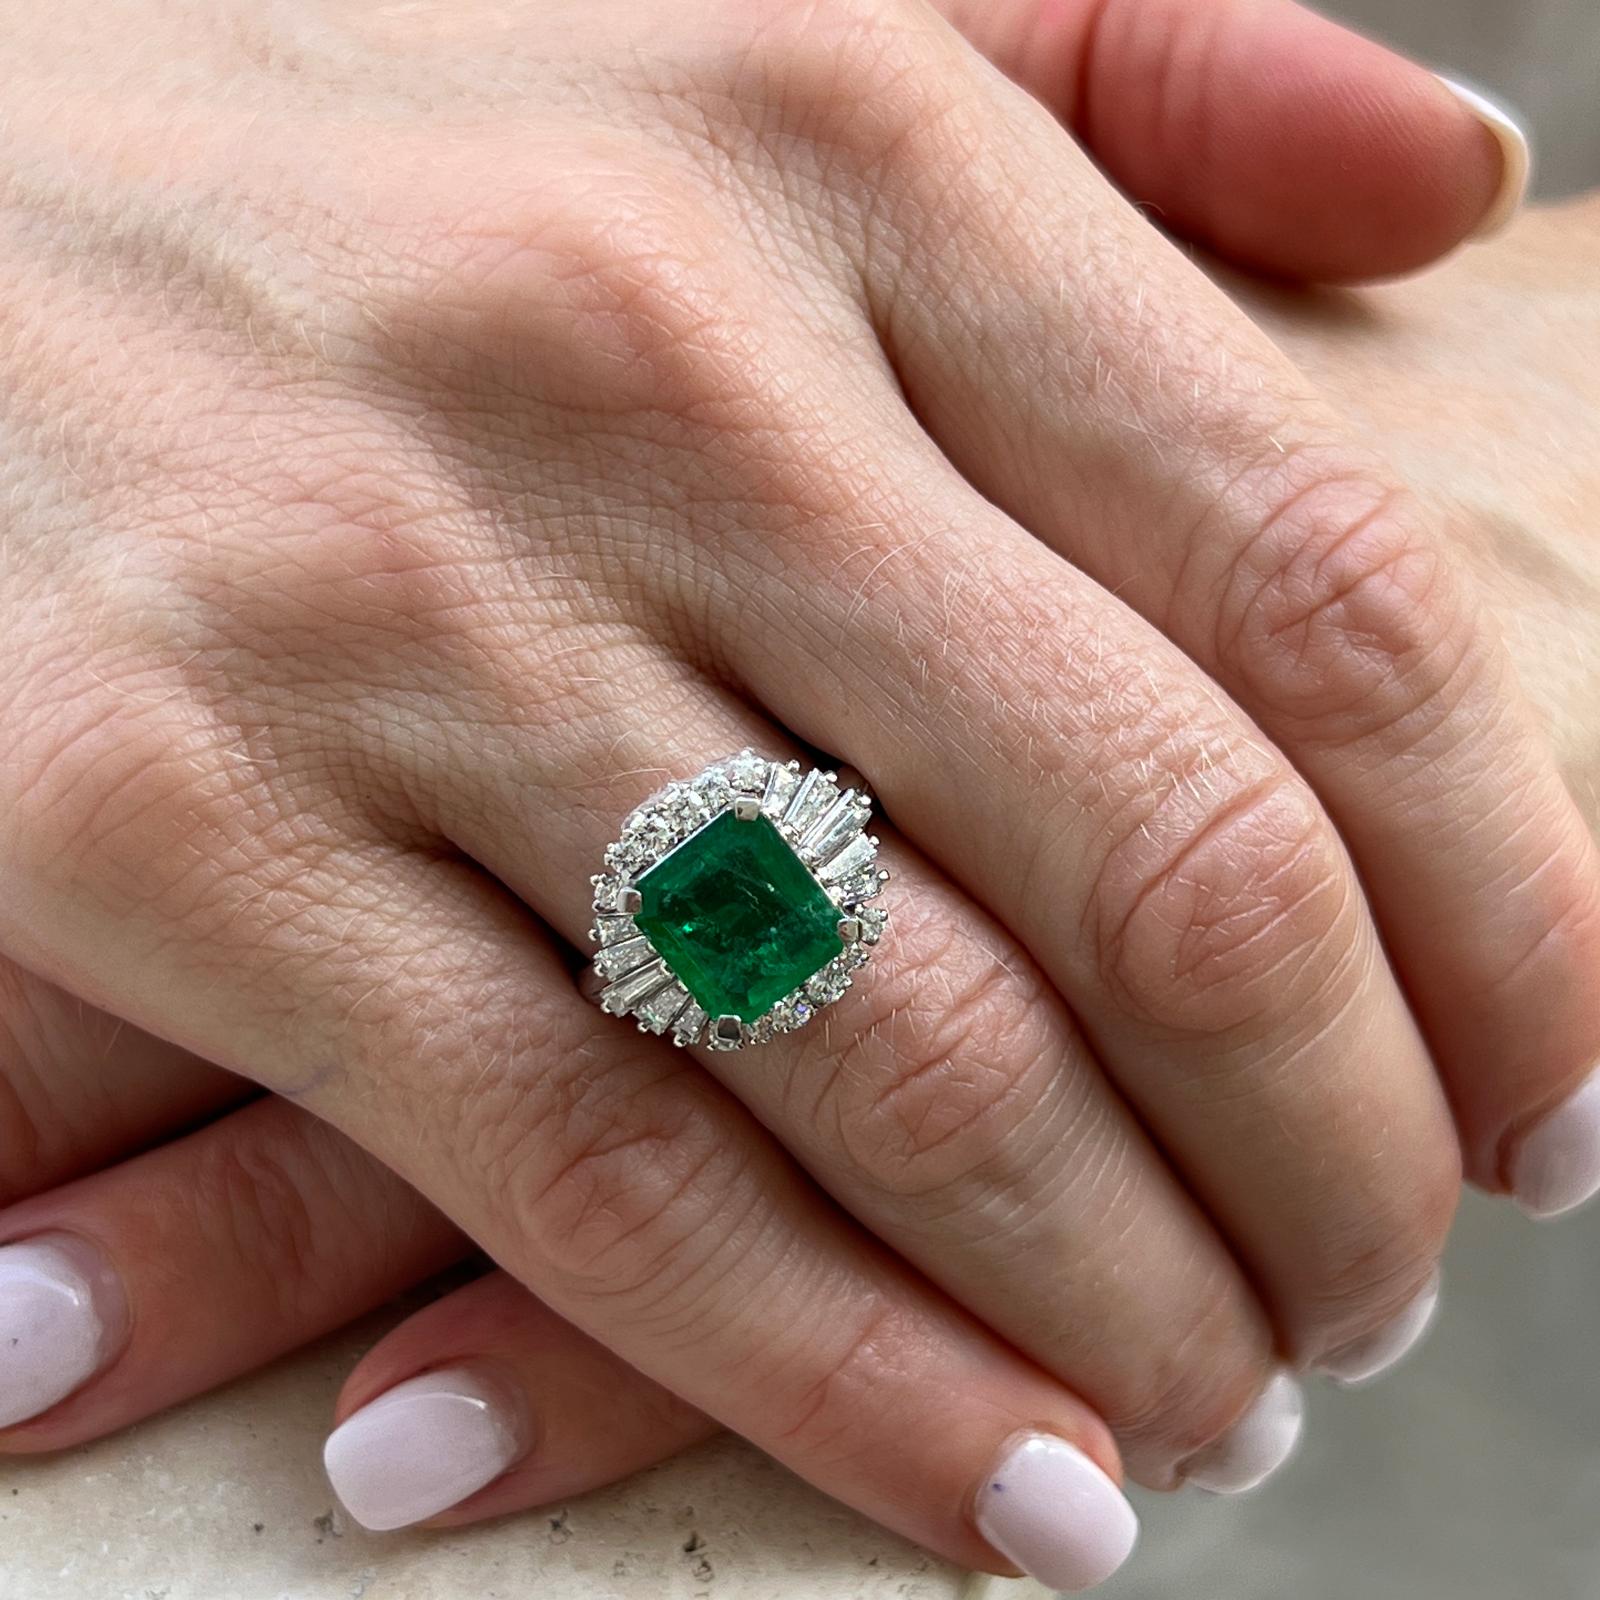 Beautiful emerald diamond cocktail ring crafted in platinum. The ring features a 2.45 carat natural green emerald cut emerald in a ballerina setting. The round and baguette cut diamonds weigh .94 carat total weight and are graded G-H color and VS